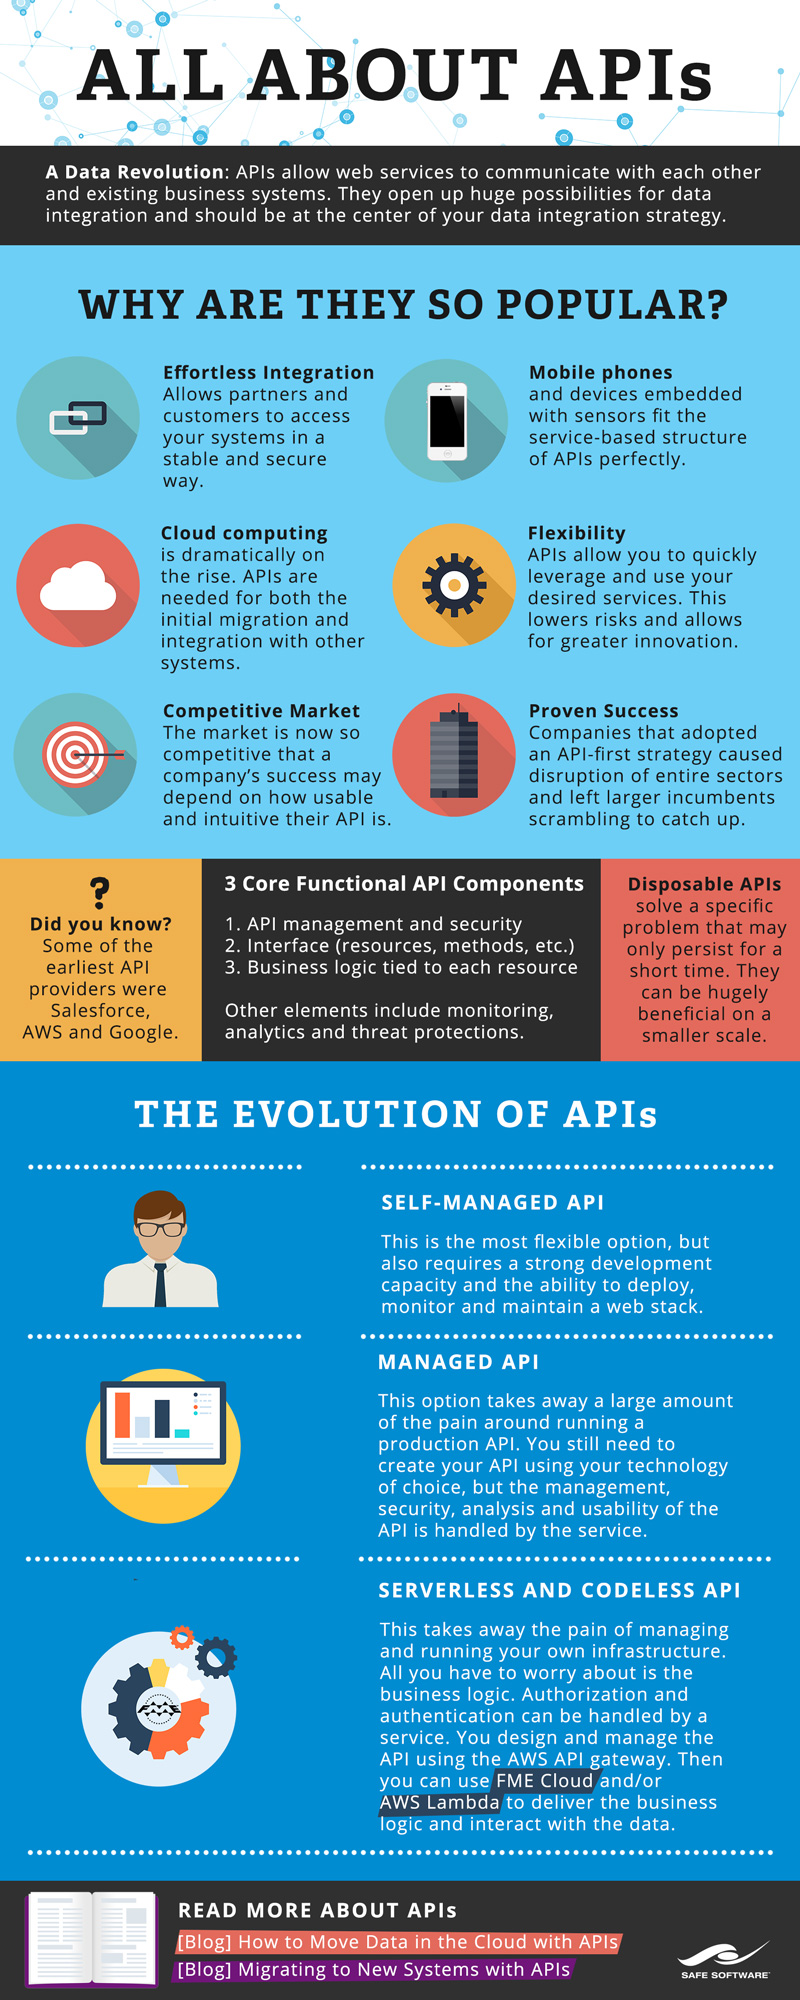 All About APIs Infographic